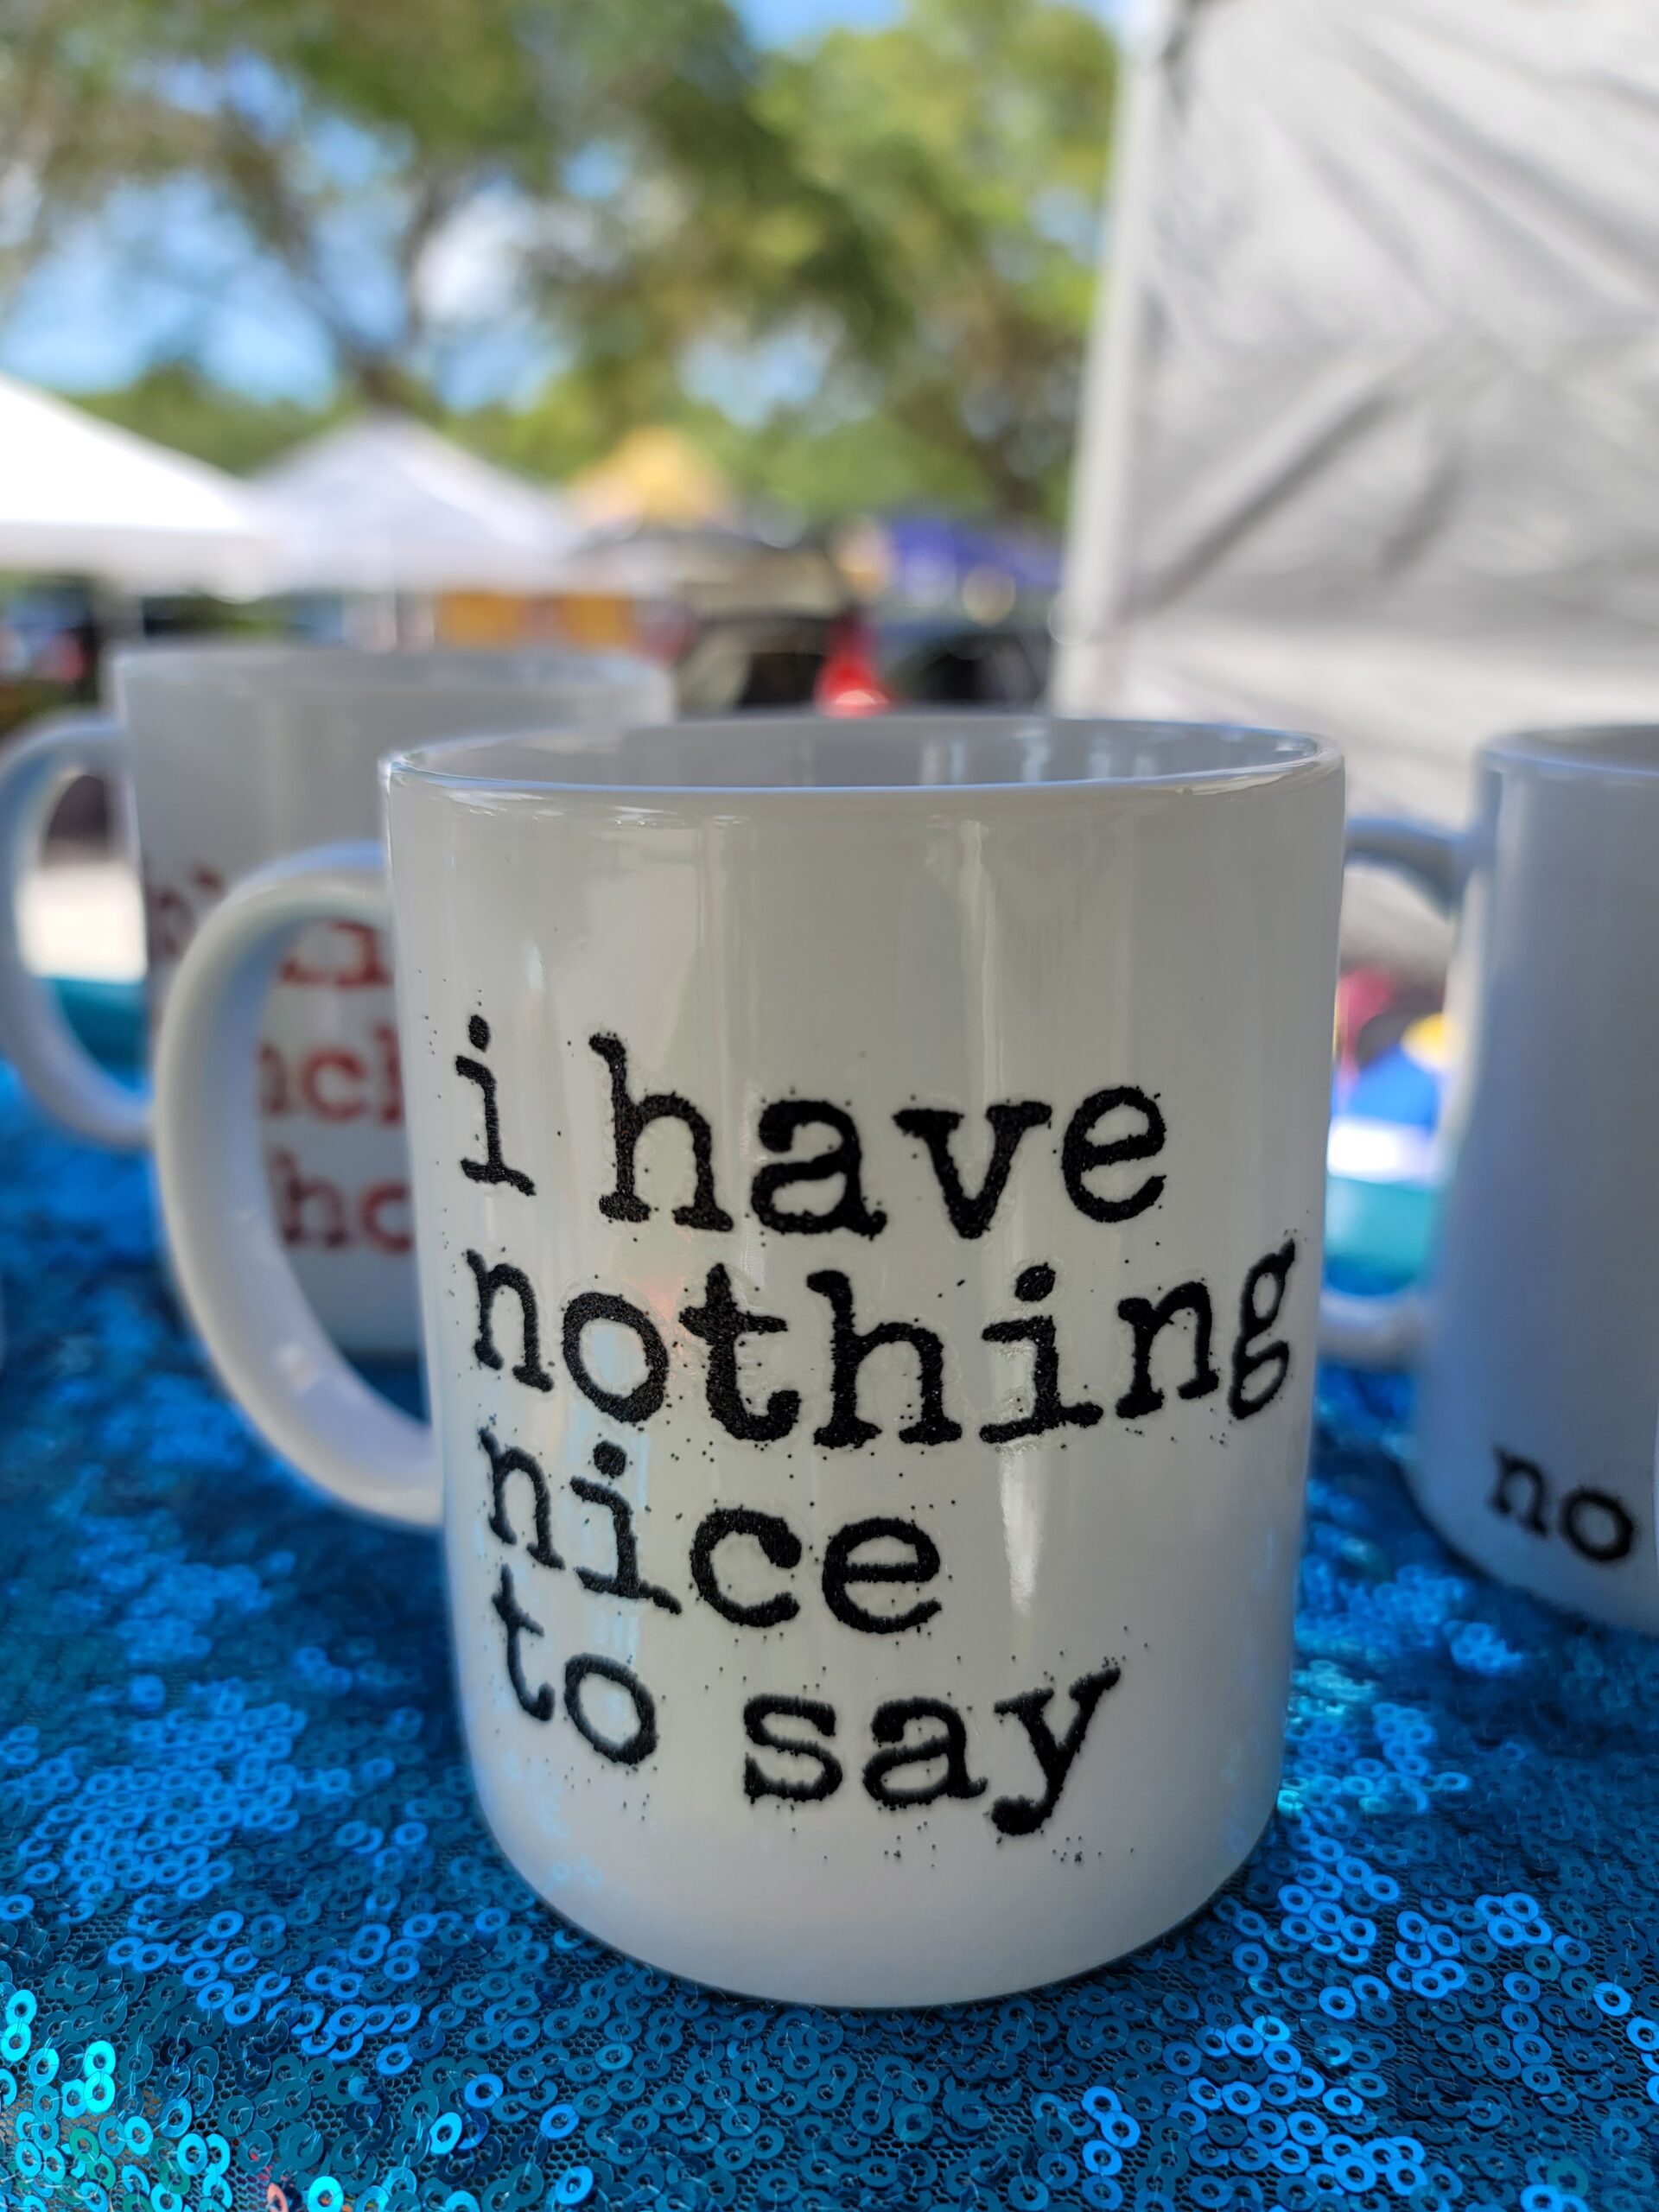 malarkey's first vendor fair exposed - i have nothing nice to say - coffee cup